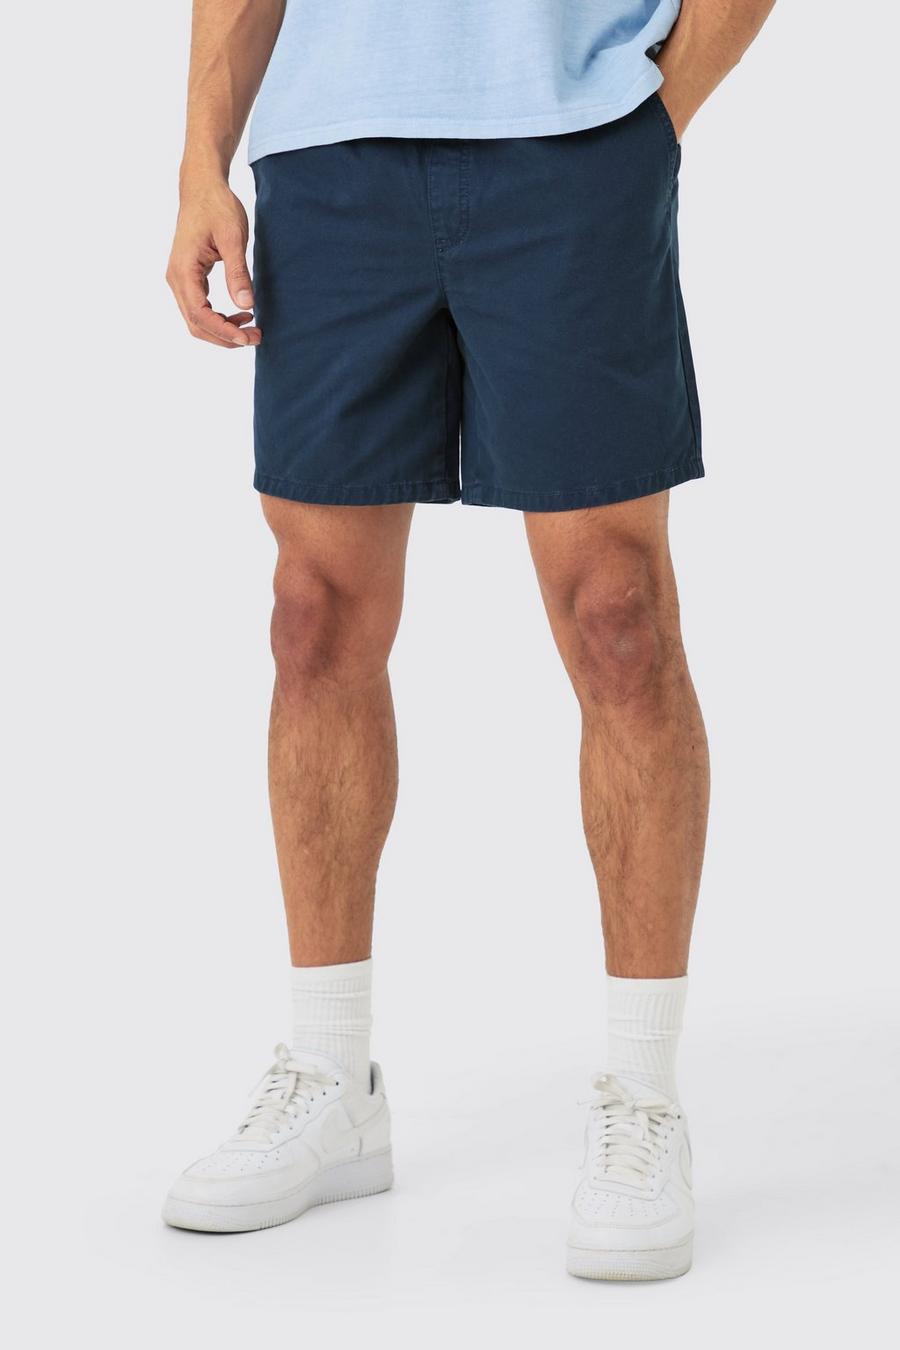 Shorter Length Relaxed Fit Elastic Waist Chino Shorts in Navy